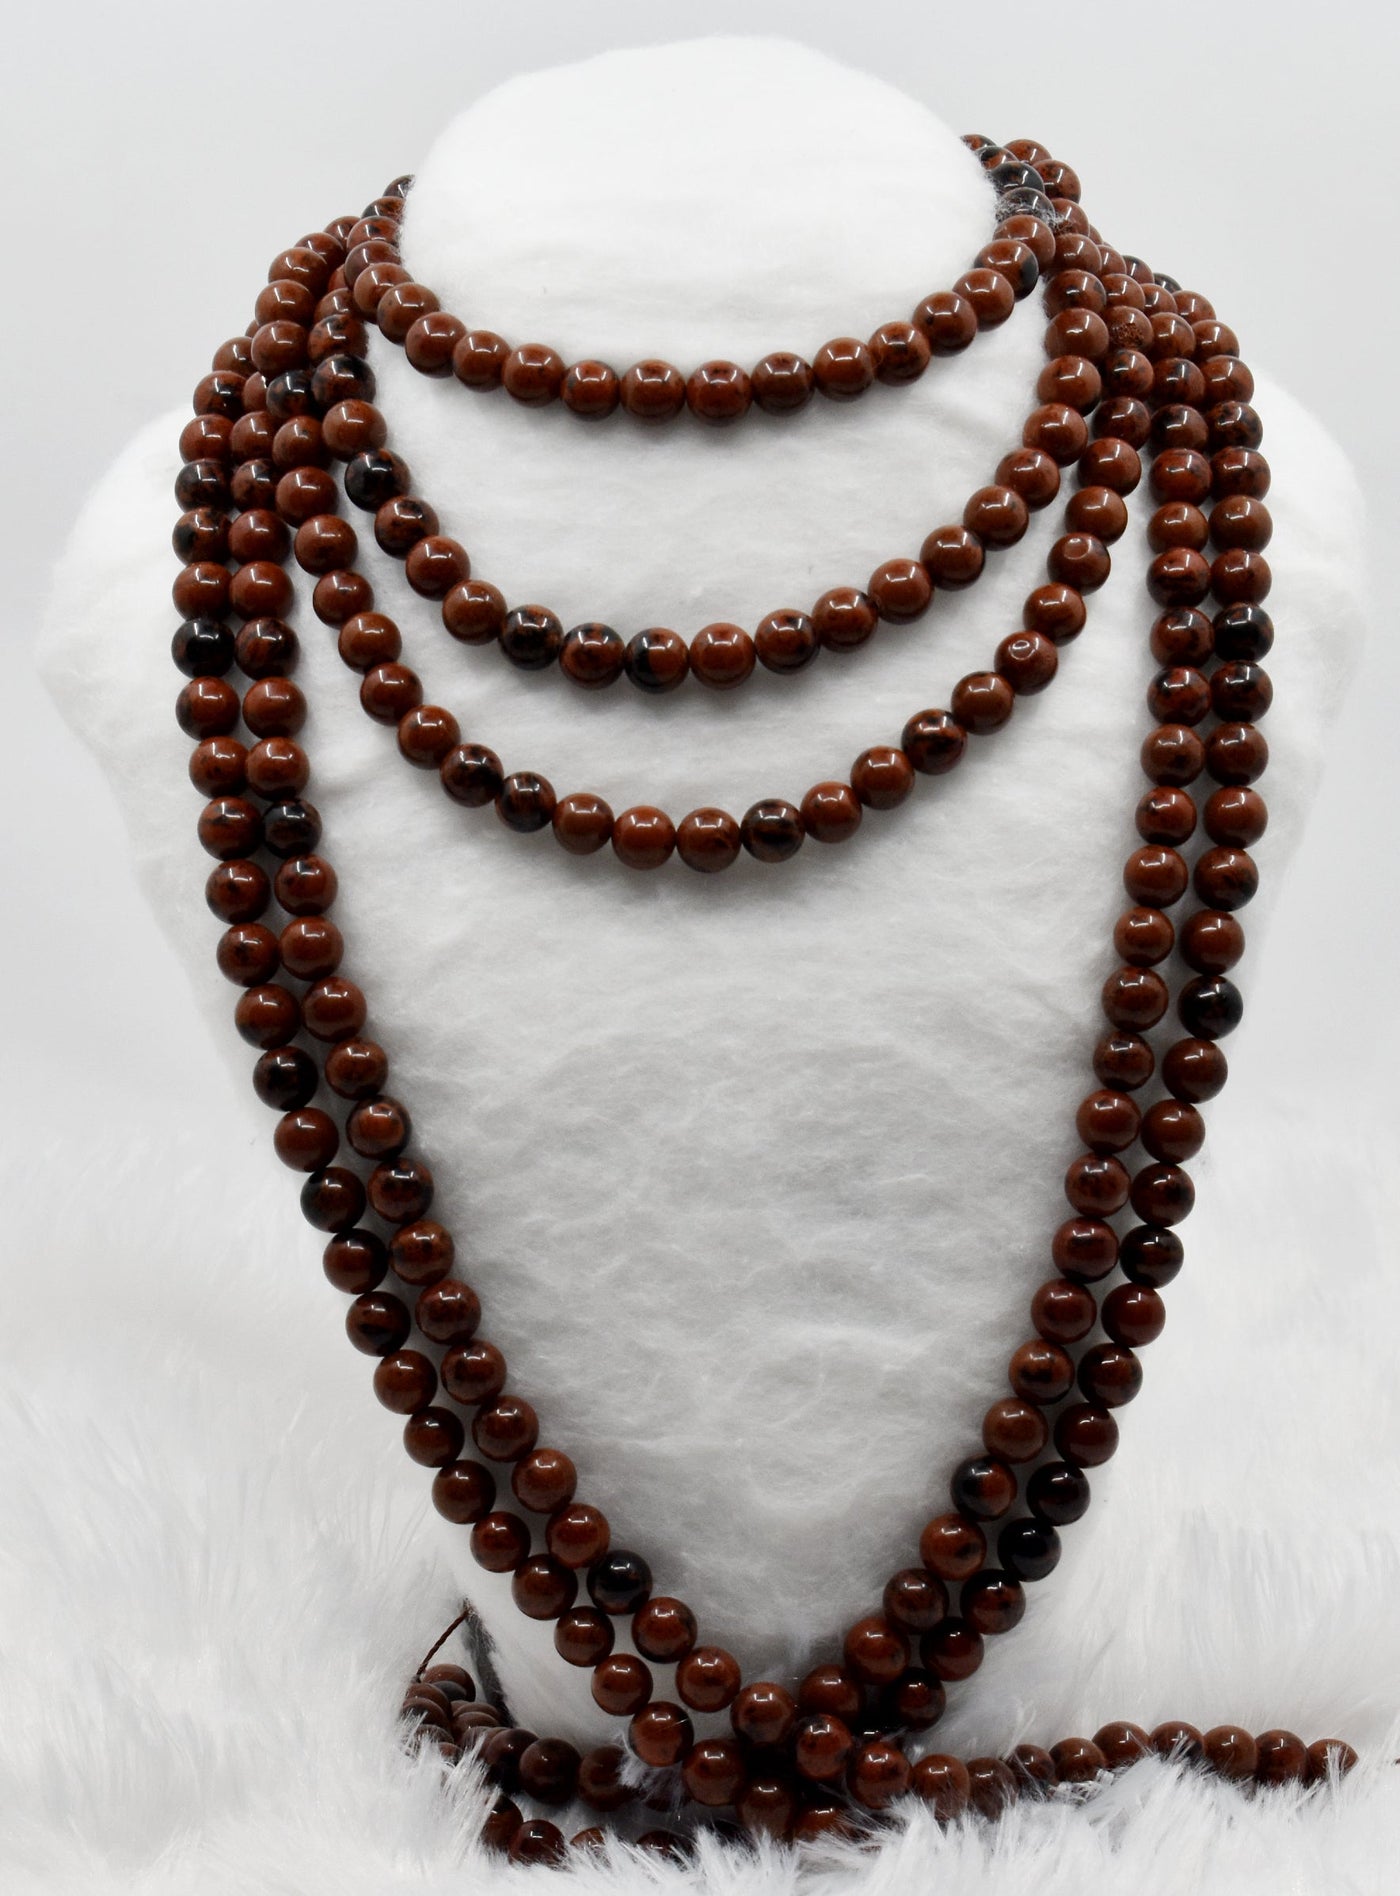 Mahogany Obsidian Beads, Natural Round Crystal Beads 4mm to 12mm